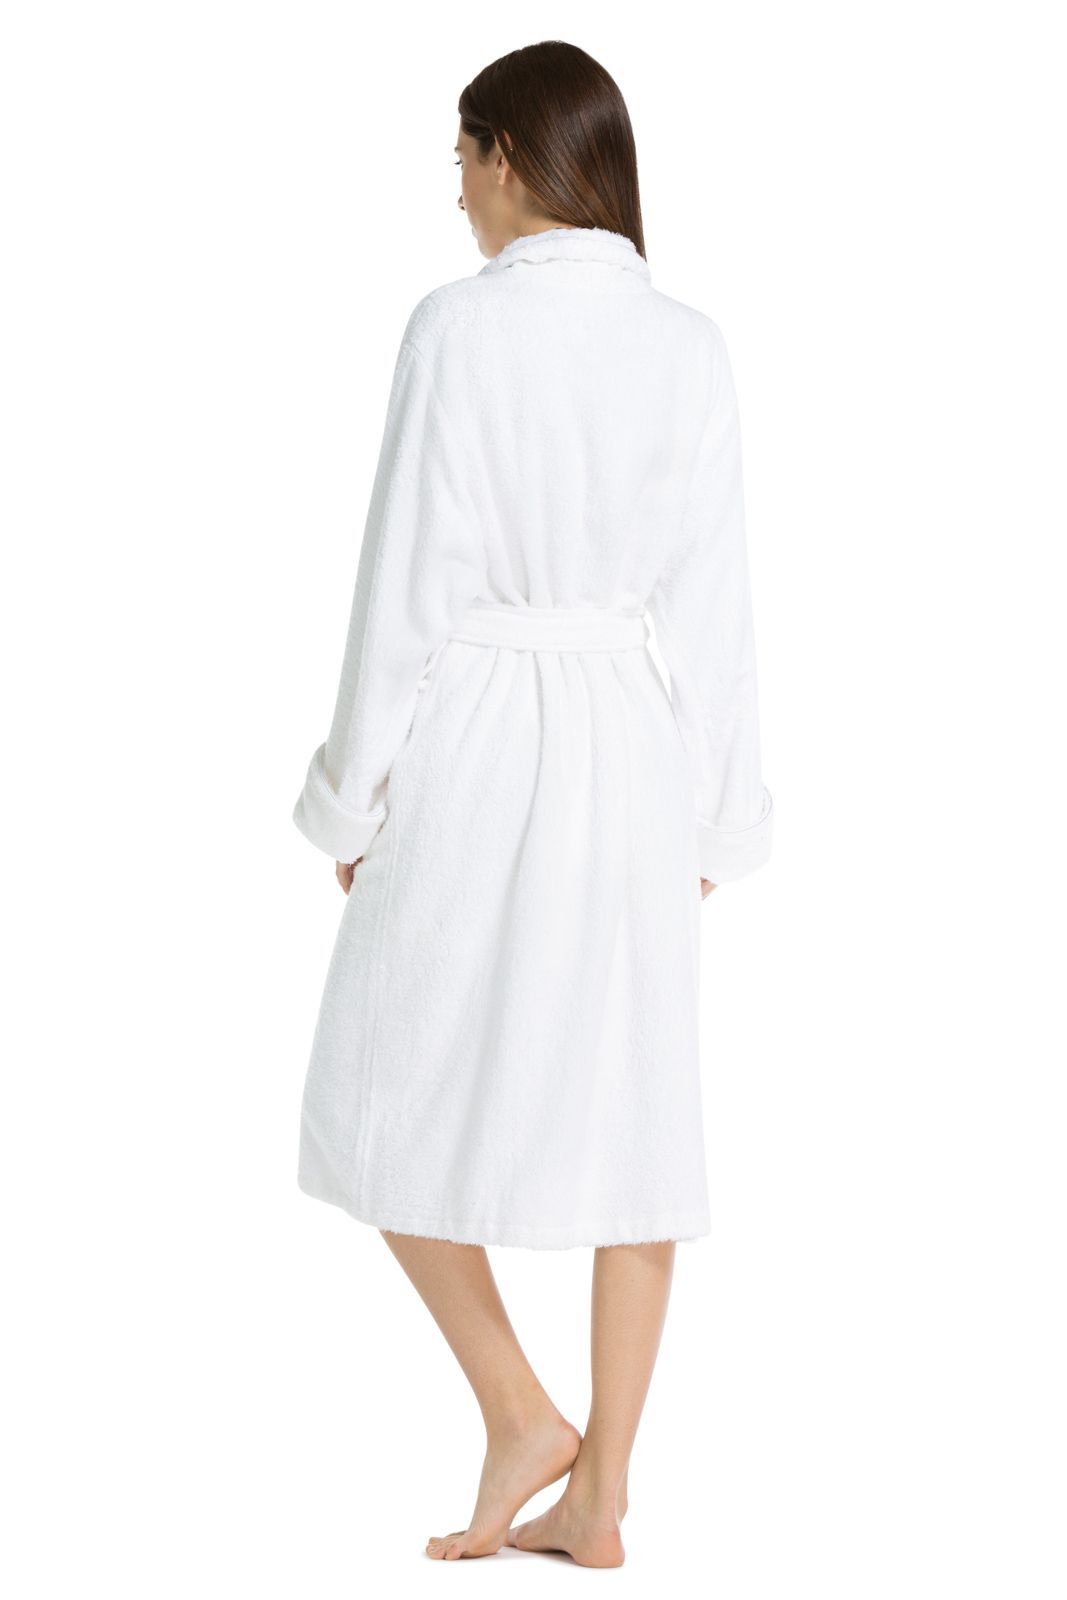 Fishers Finery Women's EcoFabric Resort Style Spa Wrap; Terry Cloth